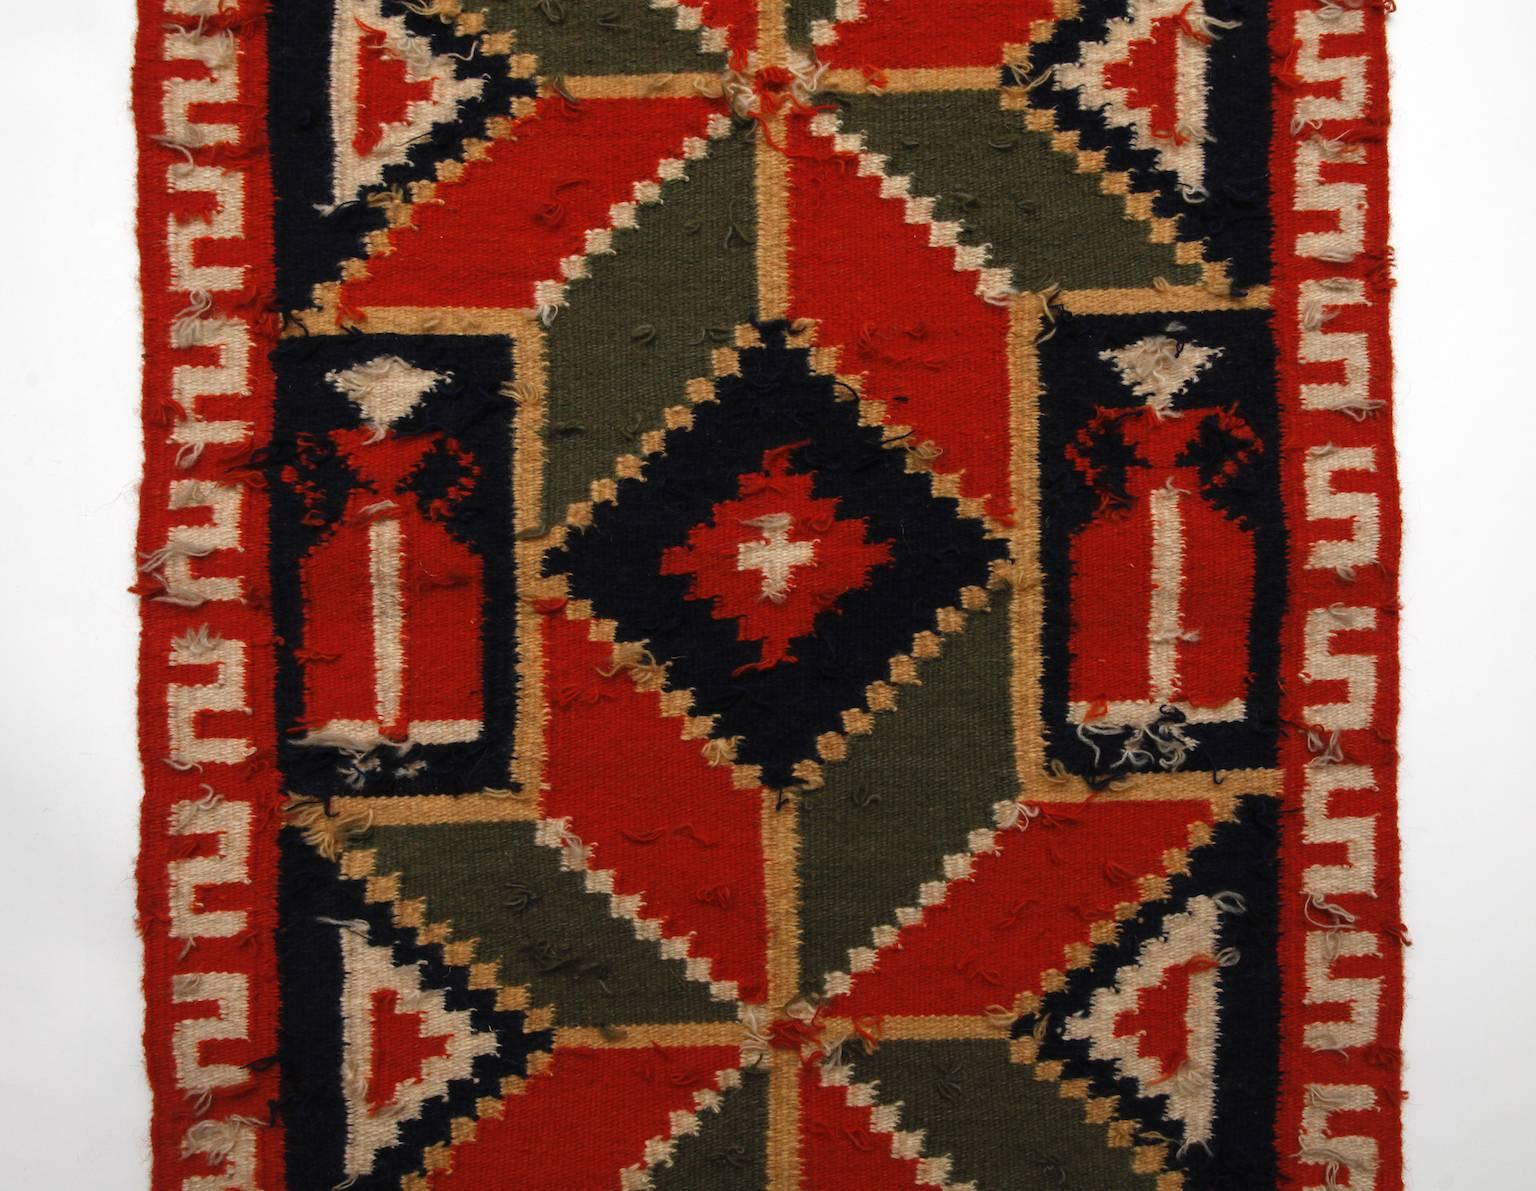 Handwoven Swedish Wool Tapestry with Two Women in the Shape of an 